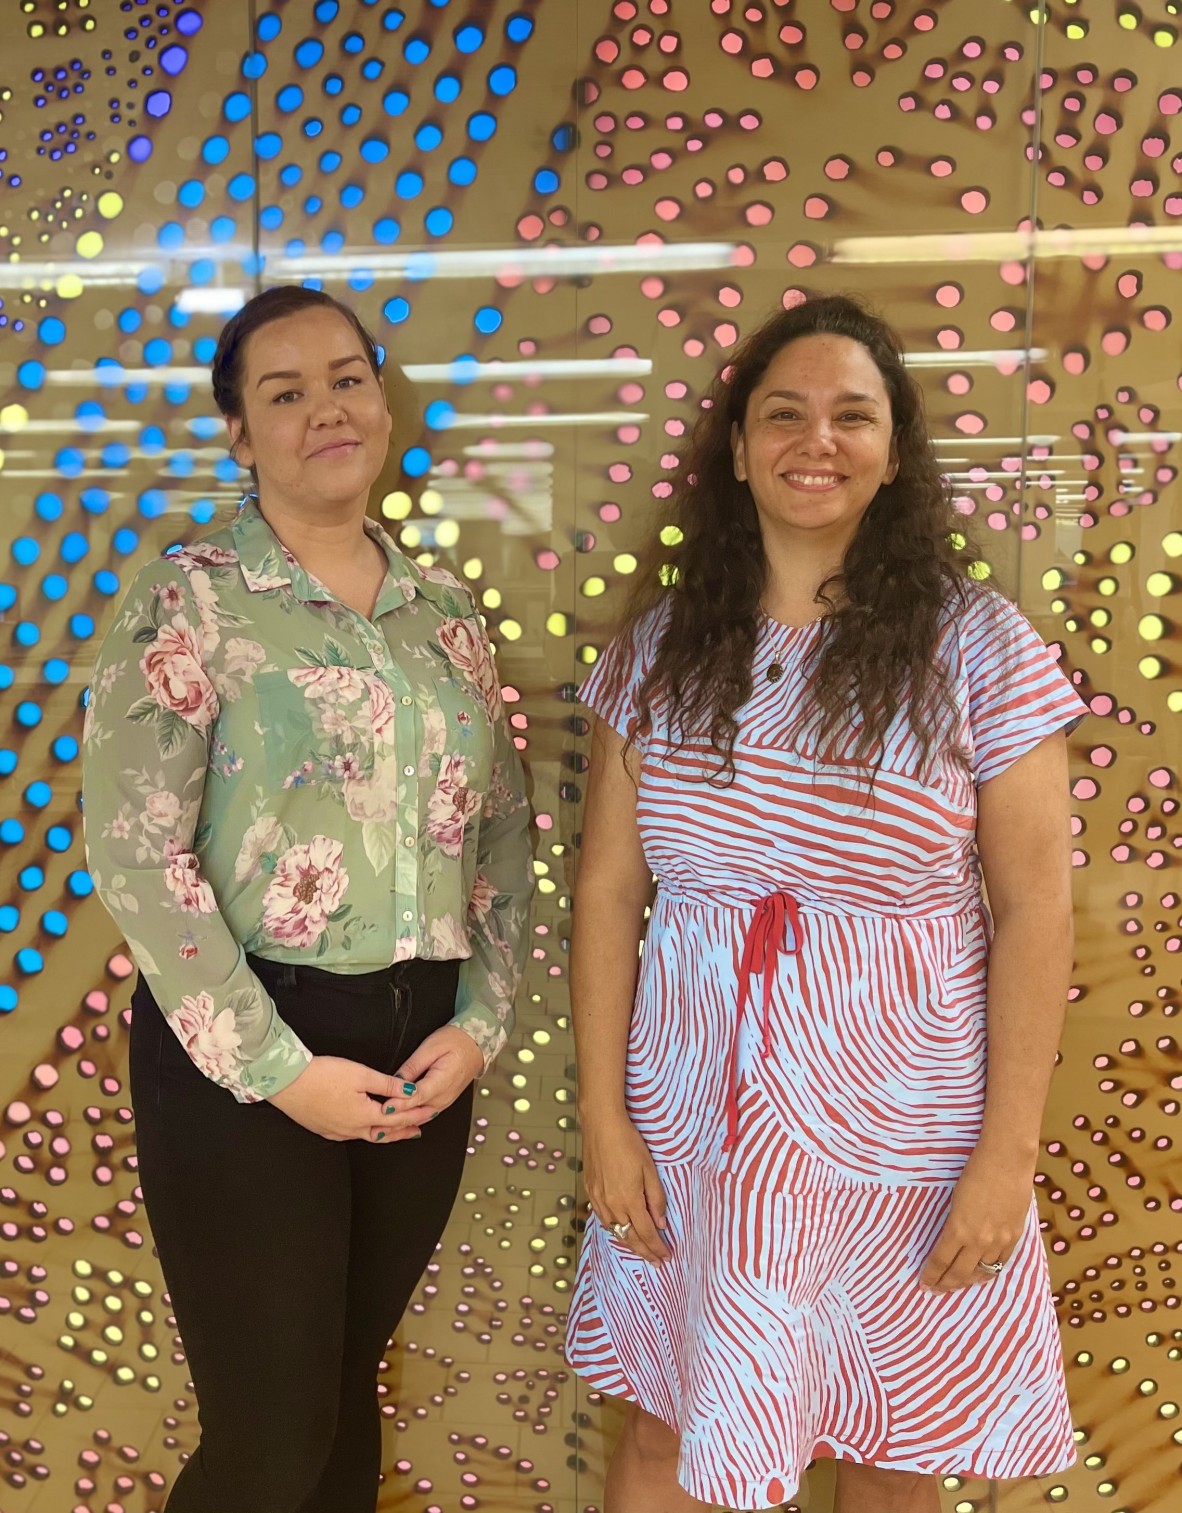 Nadia Johansen and Bianca Valentino stand smiling in front of a brown wall lit up with yellow blue and pink lights